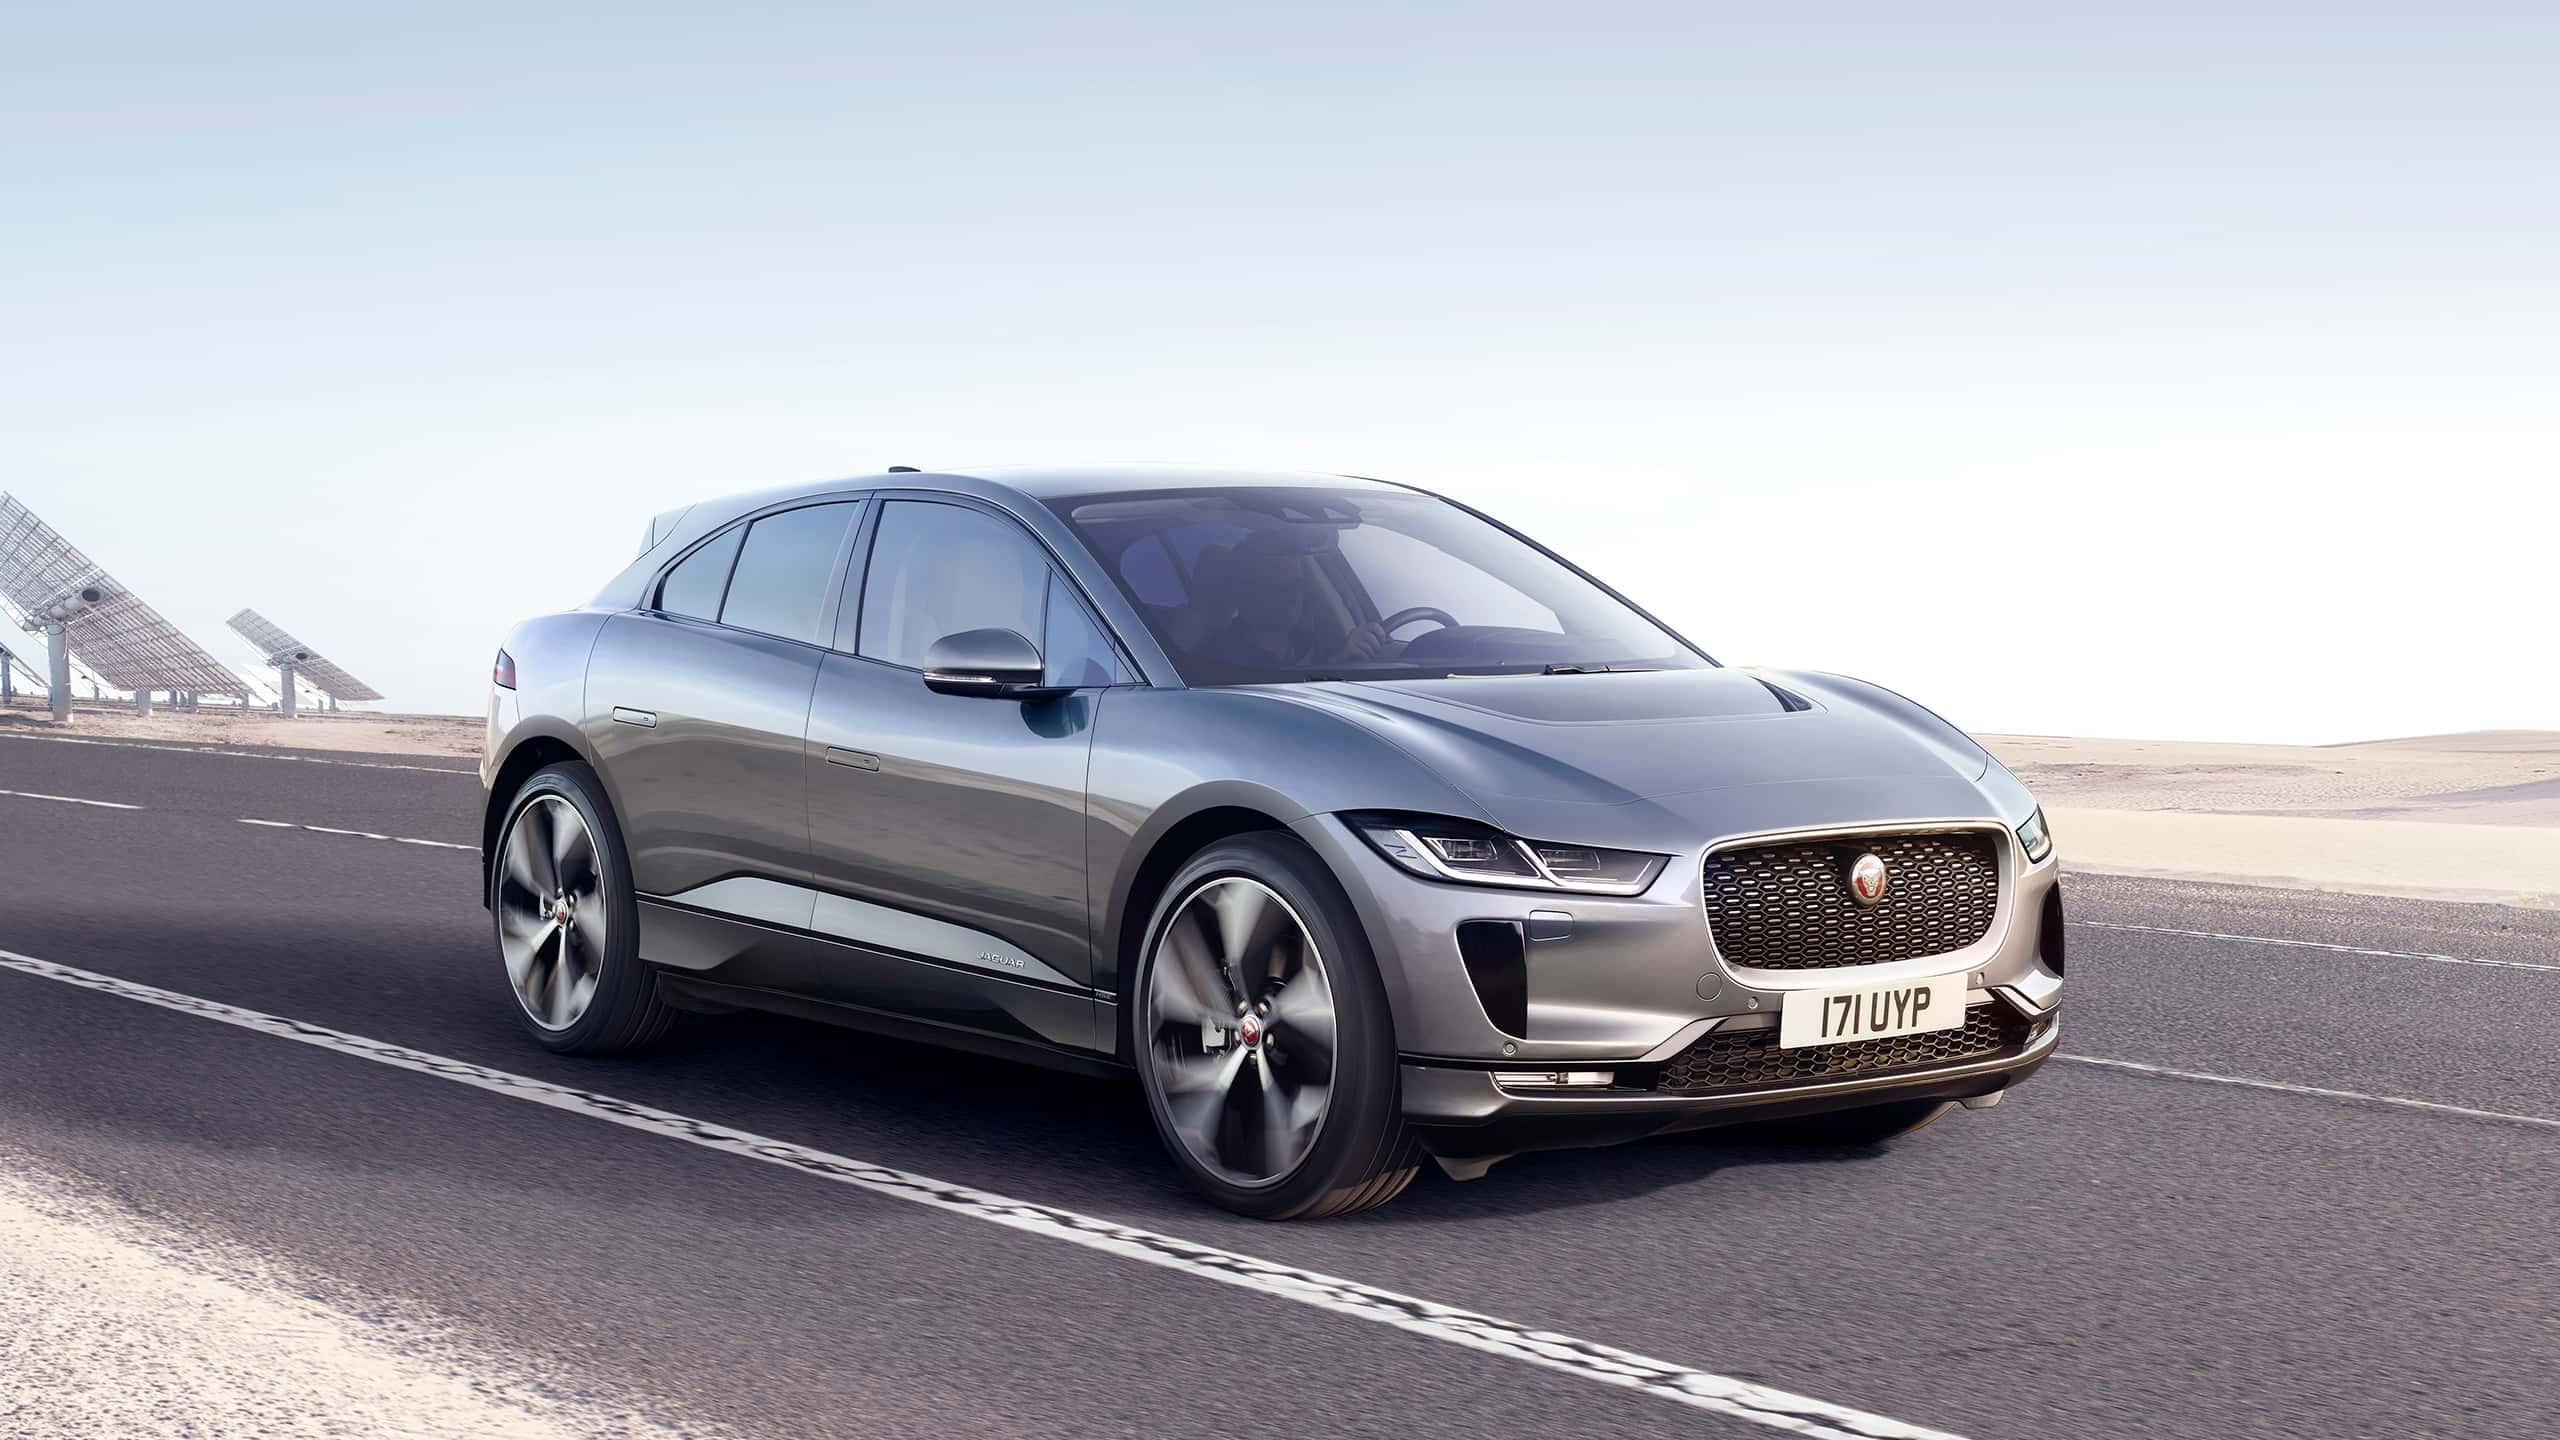 Jaguar I-Pace running on the road and with solar power plant background 